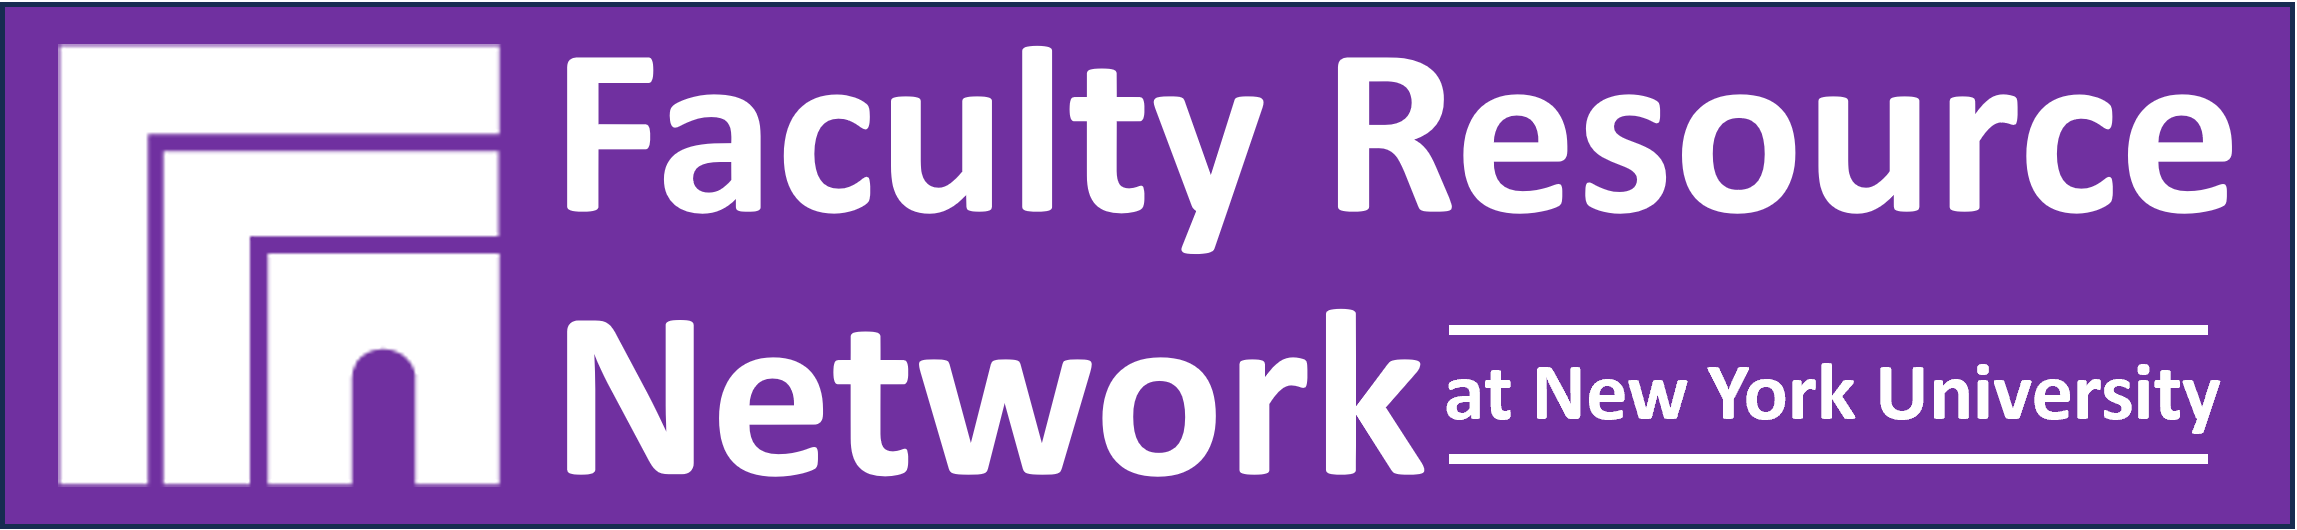 Faculty Resource Network Logo